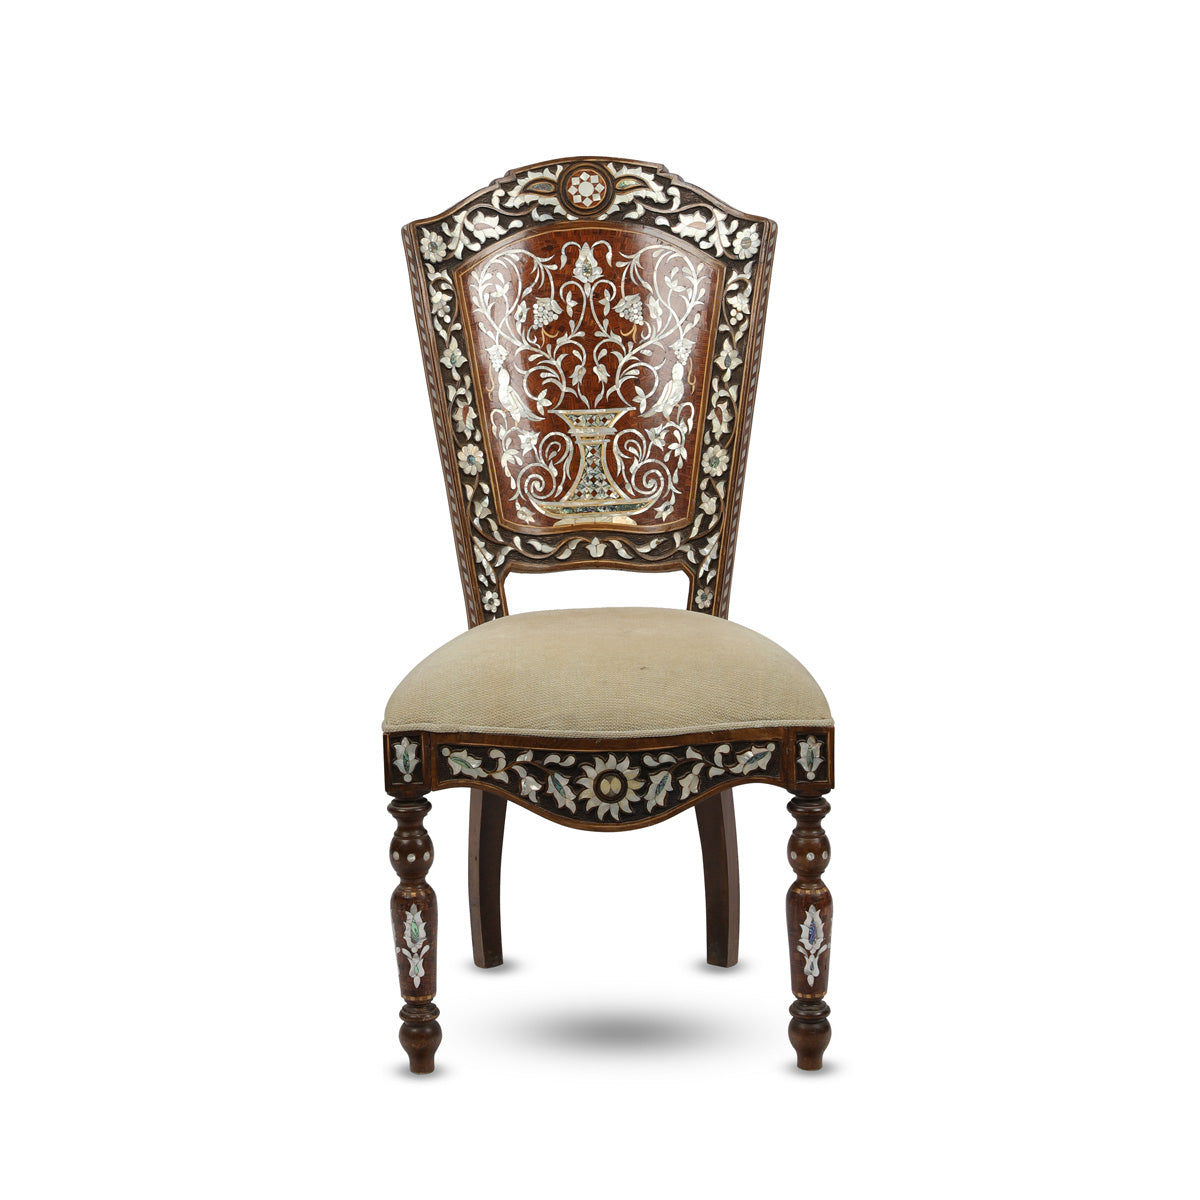 Front View of Mother of Pearl Inlaid Arabian Flat Back Chair